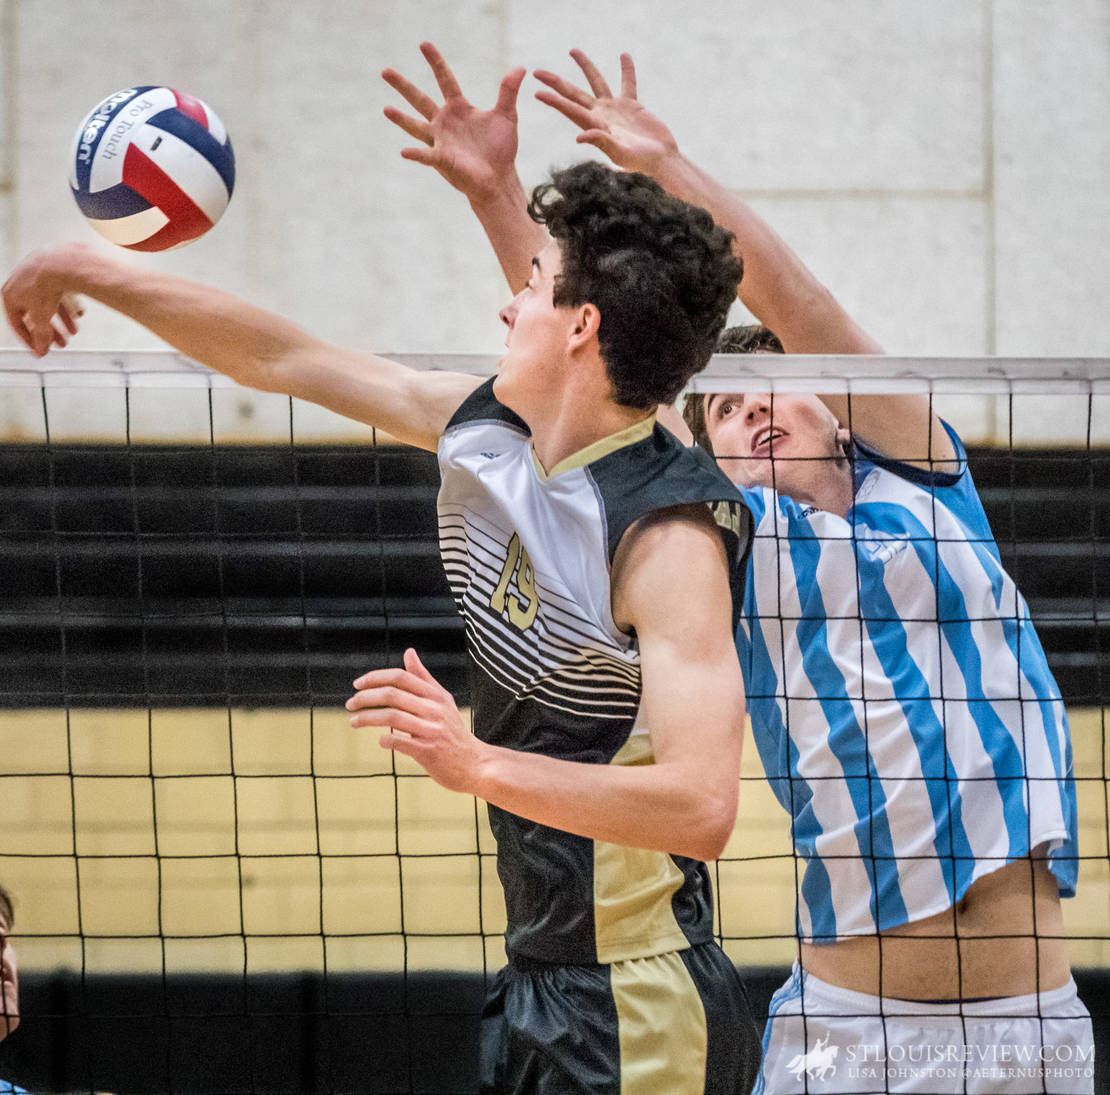 St. Louis University High School’s #12, Andrew Cross, tried to block the ball at the net against Lafayette’s Chris Harstick. St. Louis University High School Billikens beat Lafayette High School Lancers 2-3 to win the Class 4 Volleyball state championships.